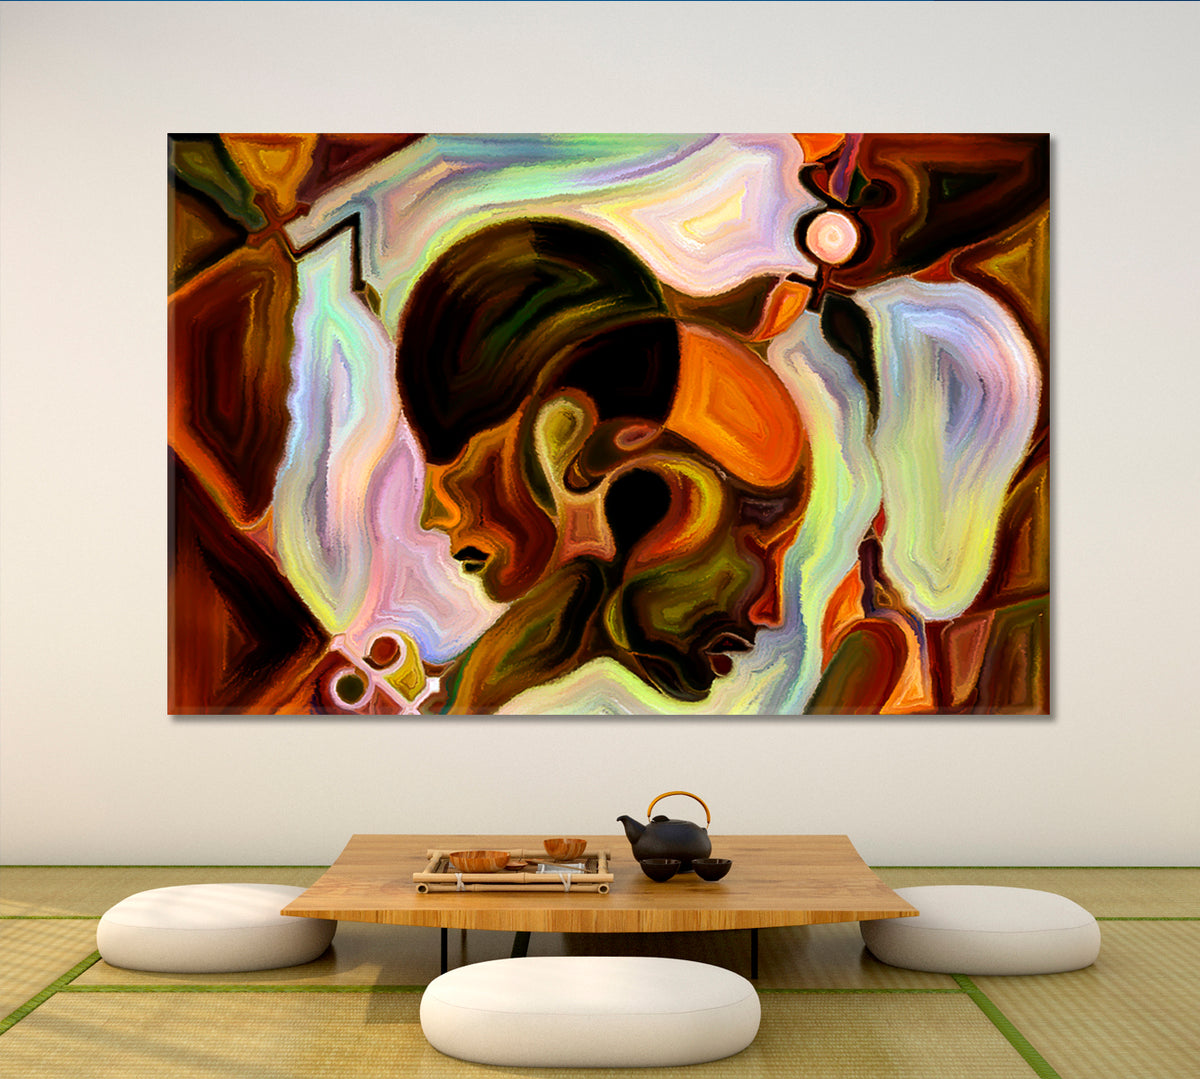 Internal Reality And Unity Of Life Abstract Design Surreal Fantasy Large Art Print Décor Artesty 1 panel 24" x 16" 